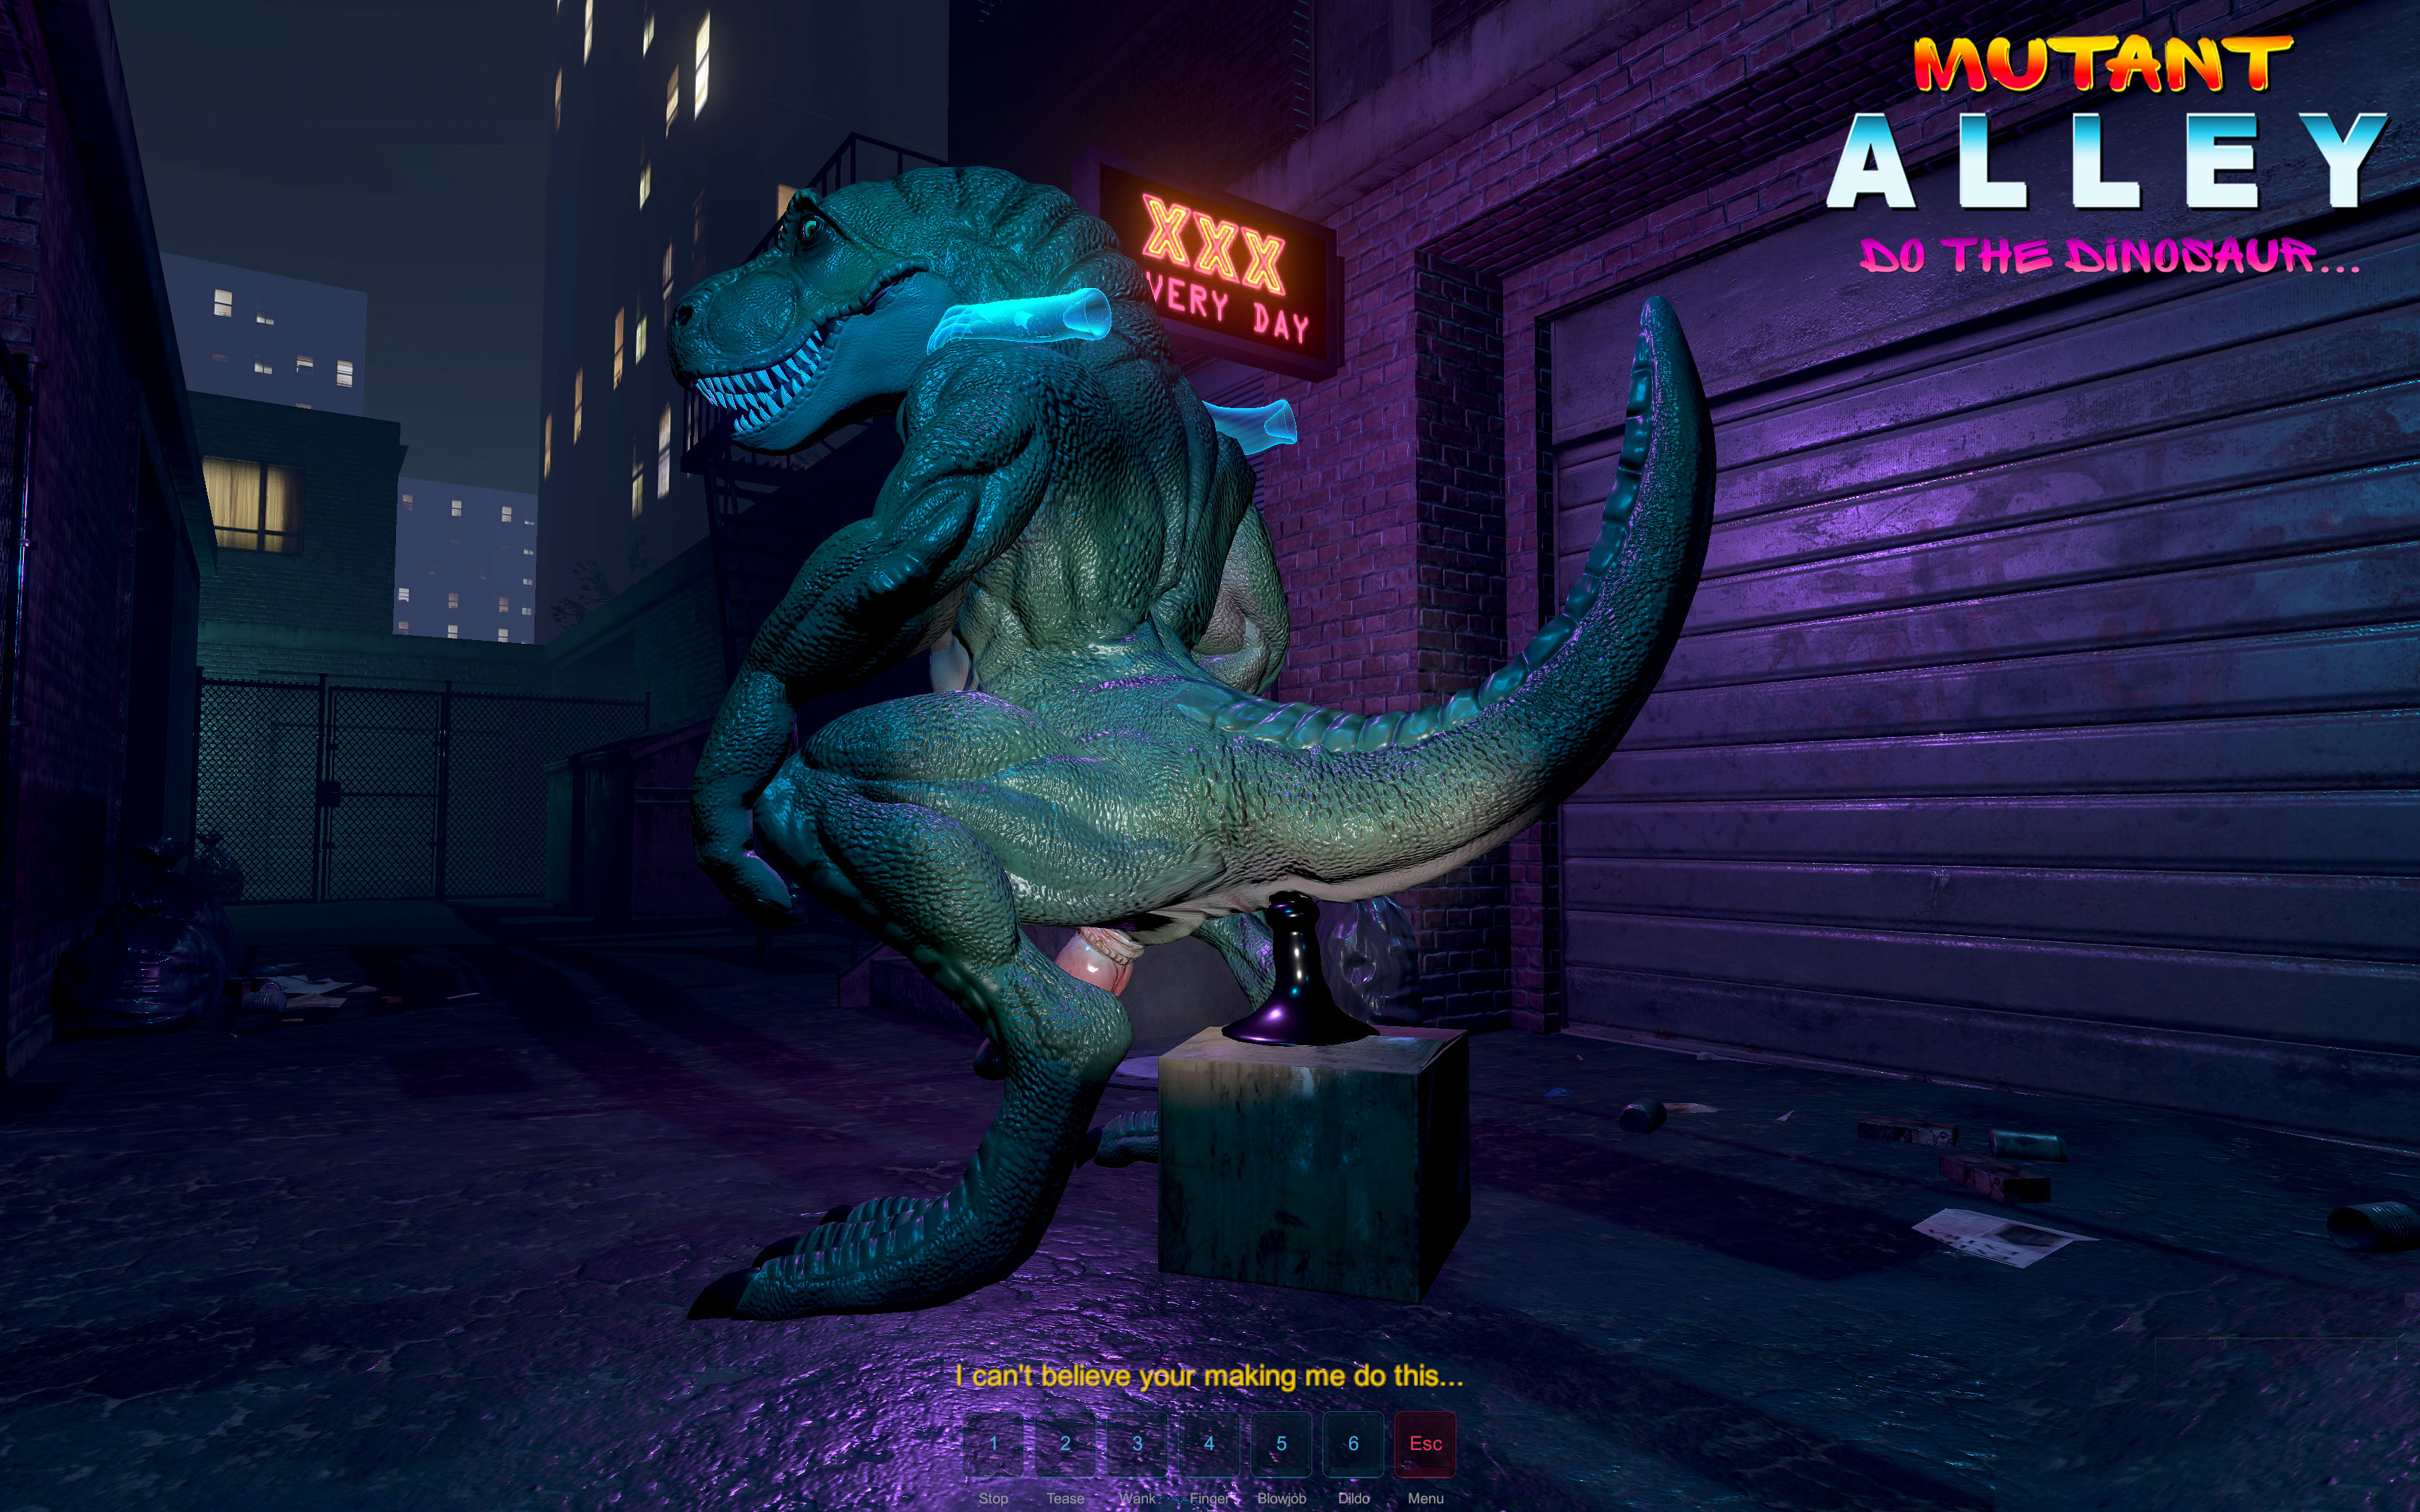 Mutant Alley: Do The Dinosaur (v1.4) is out! 